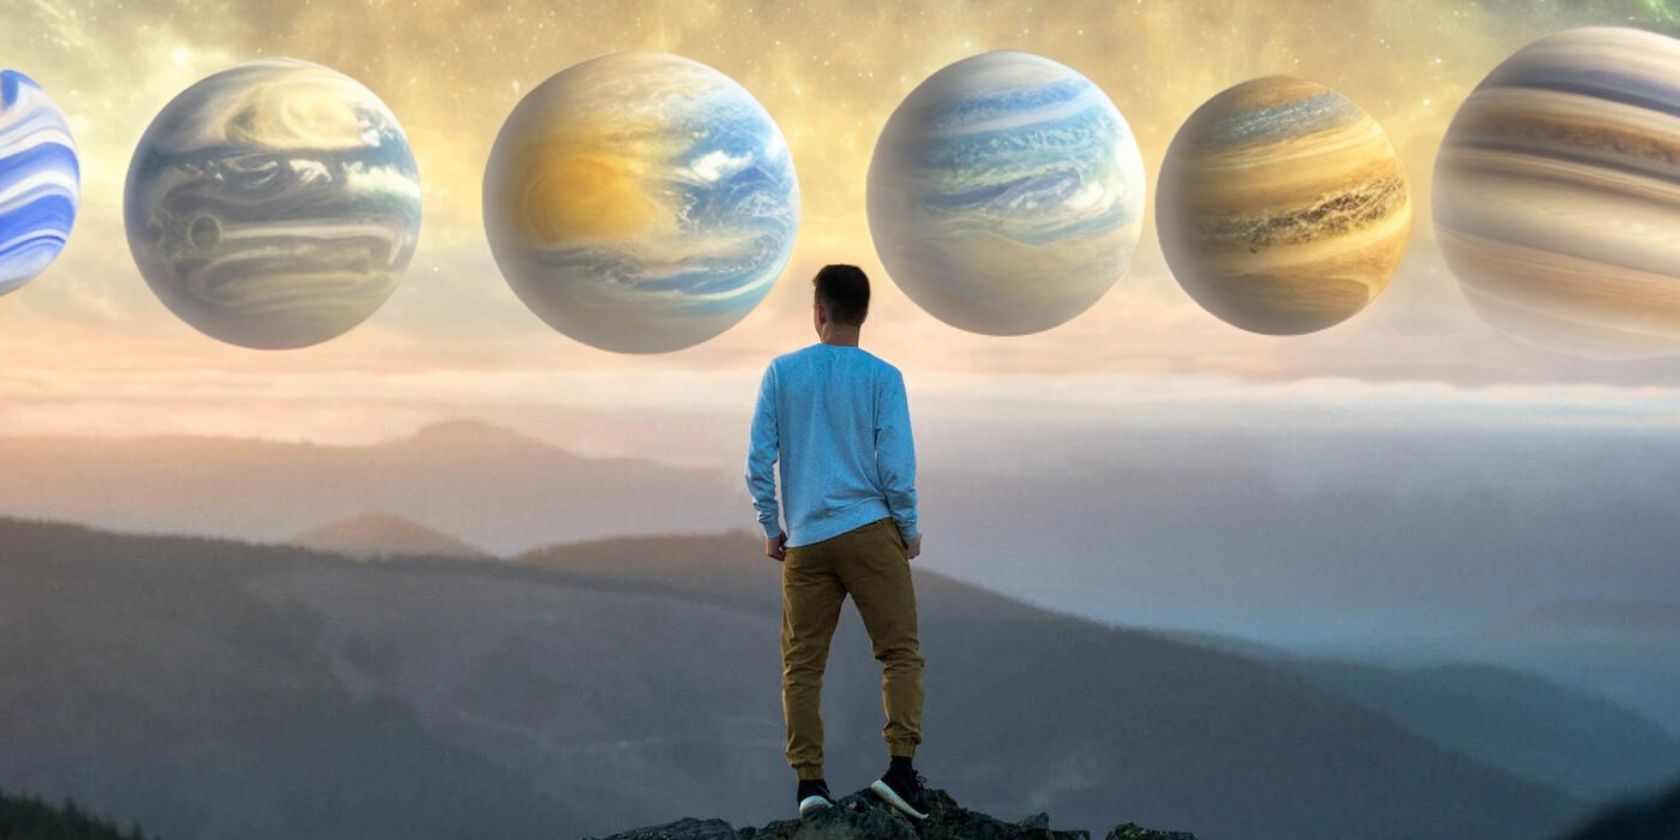 Man standing on top of mountain looking at planets in the sky